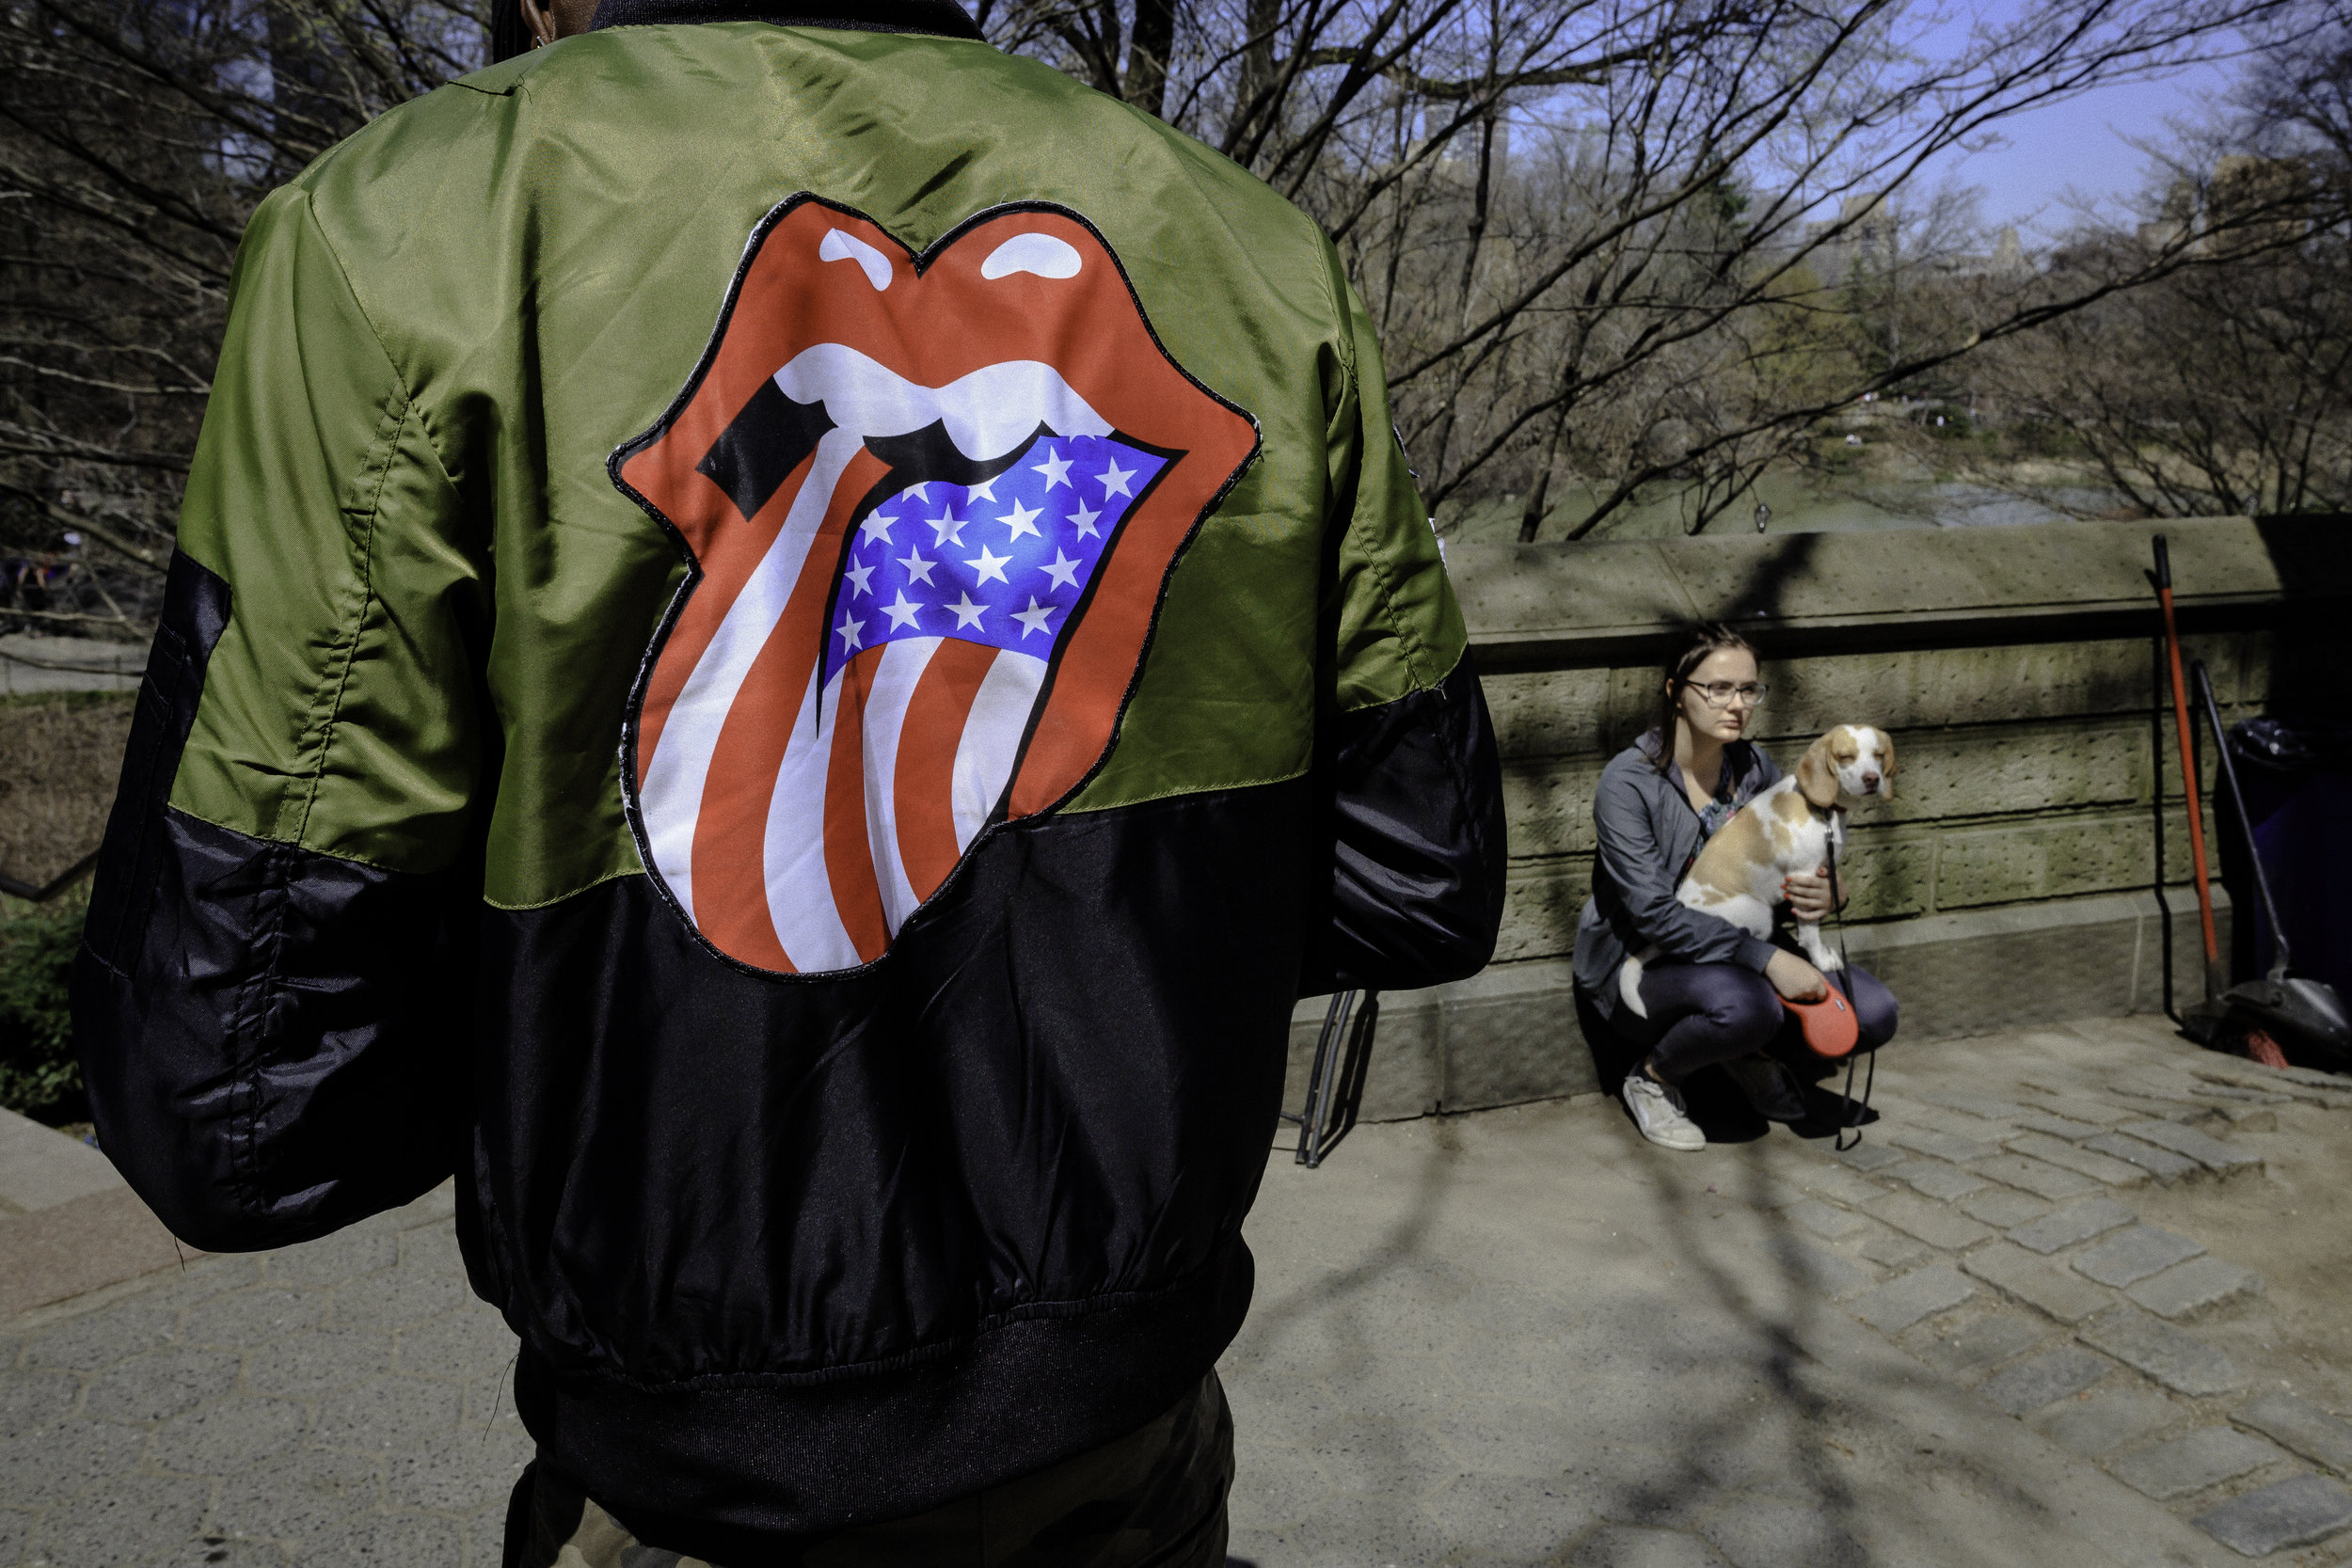 Rolling_Stones_Jacket_Woman_With_Dog_Central_Park_NYC_2017.jpg